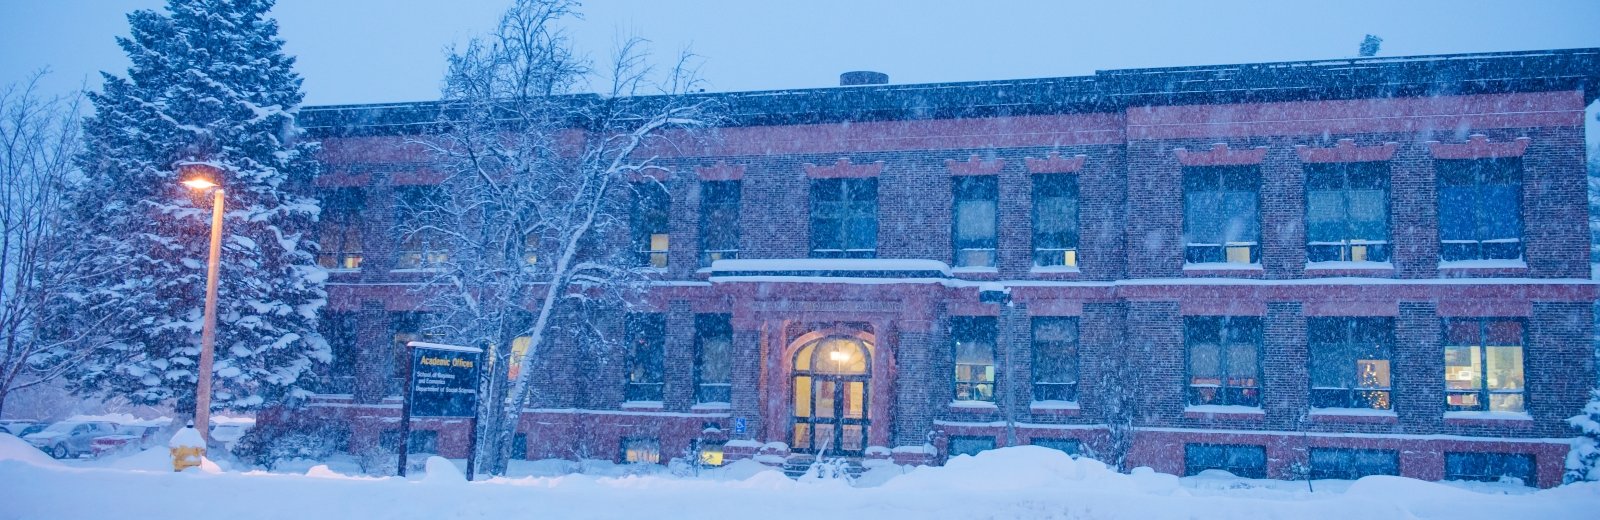 Academic Office Building in the winter.